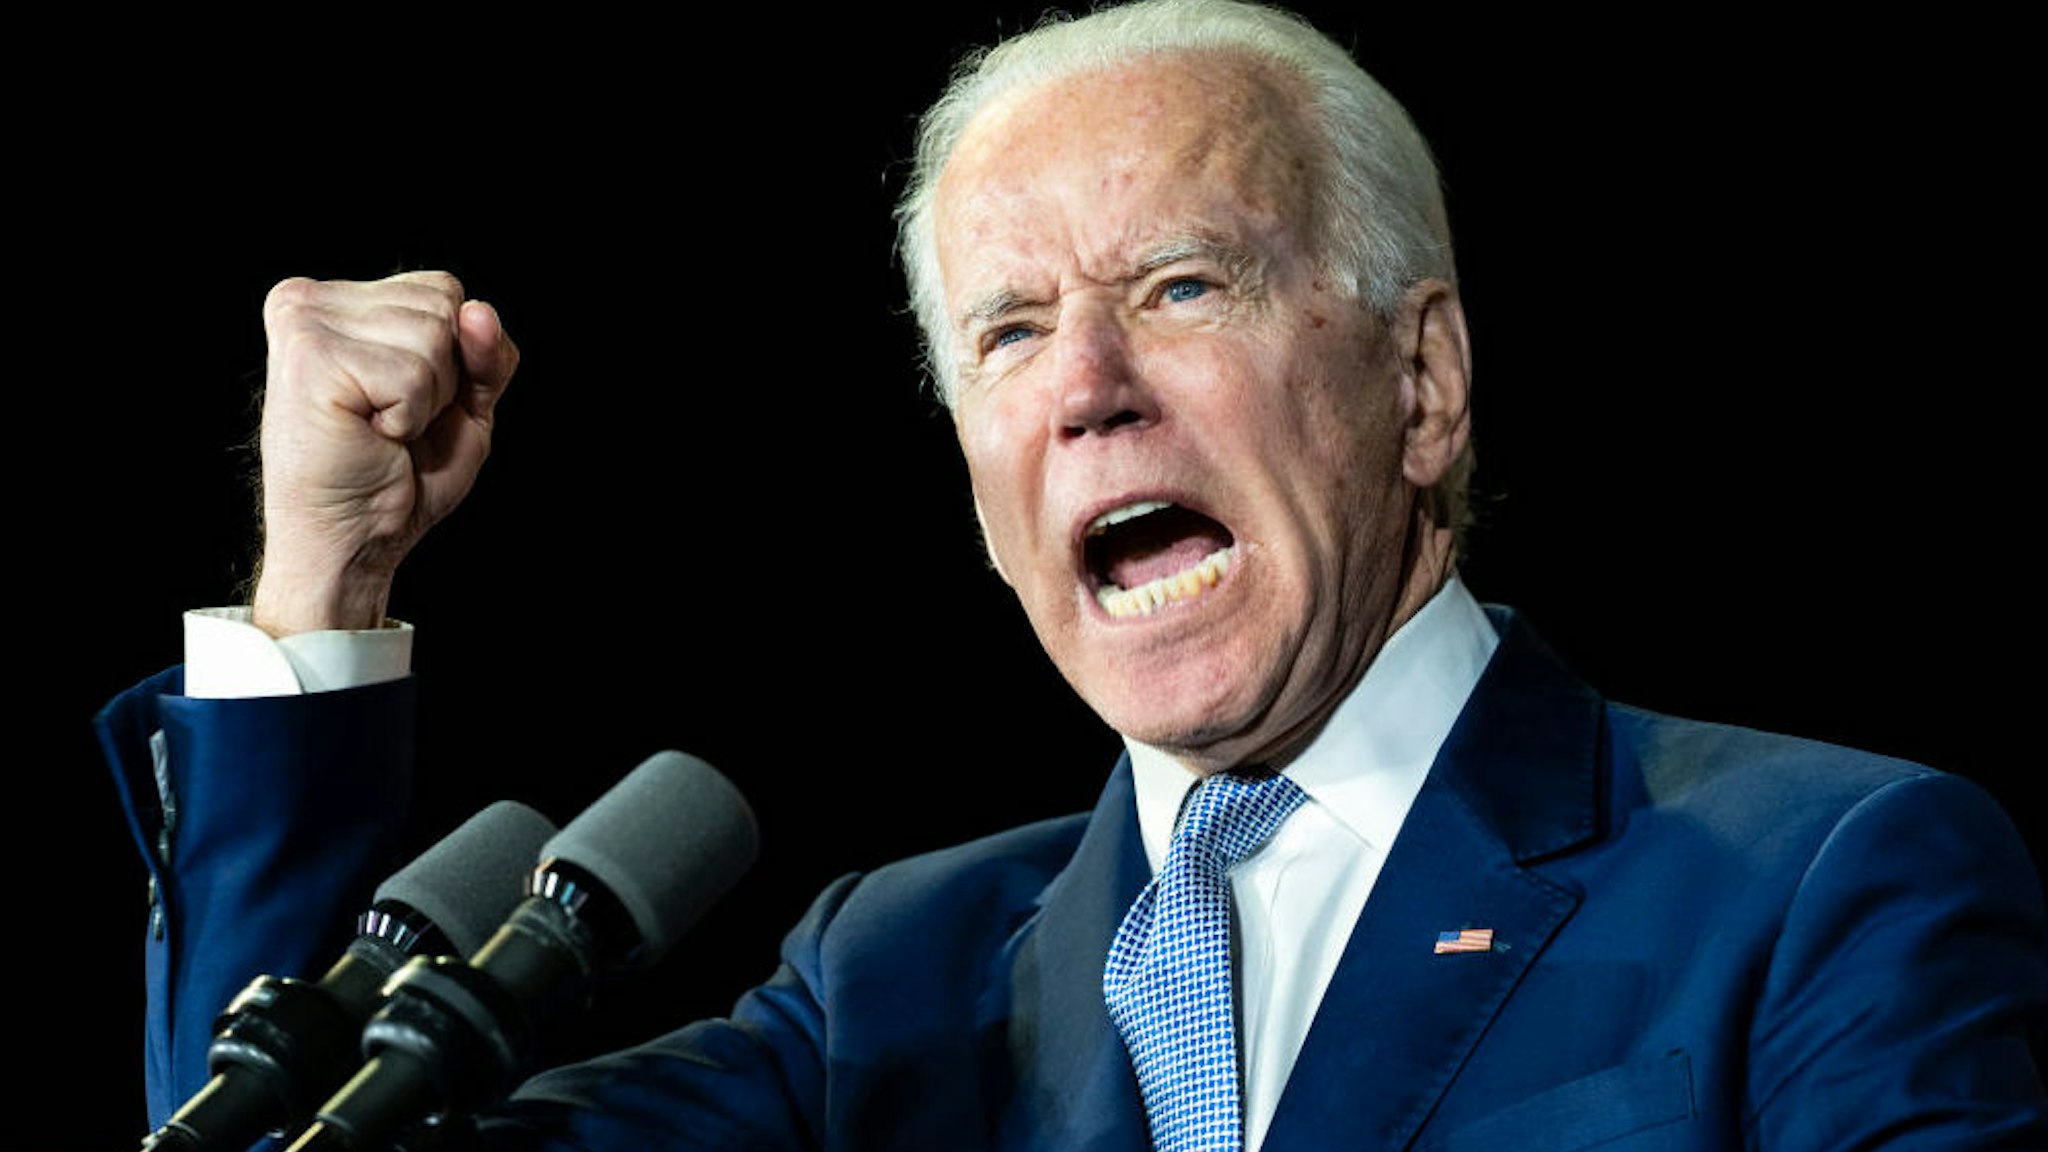 Former Vice President and Democratic presidential candidate Joe Biden speaks during a campaign rally in Los Angeles.-